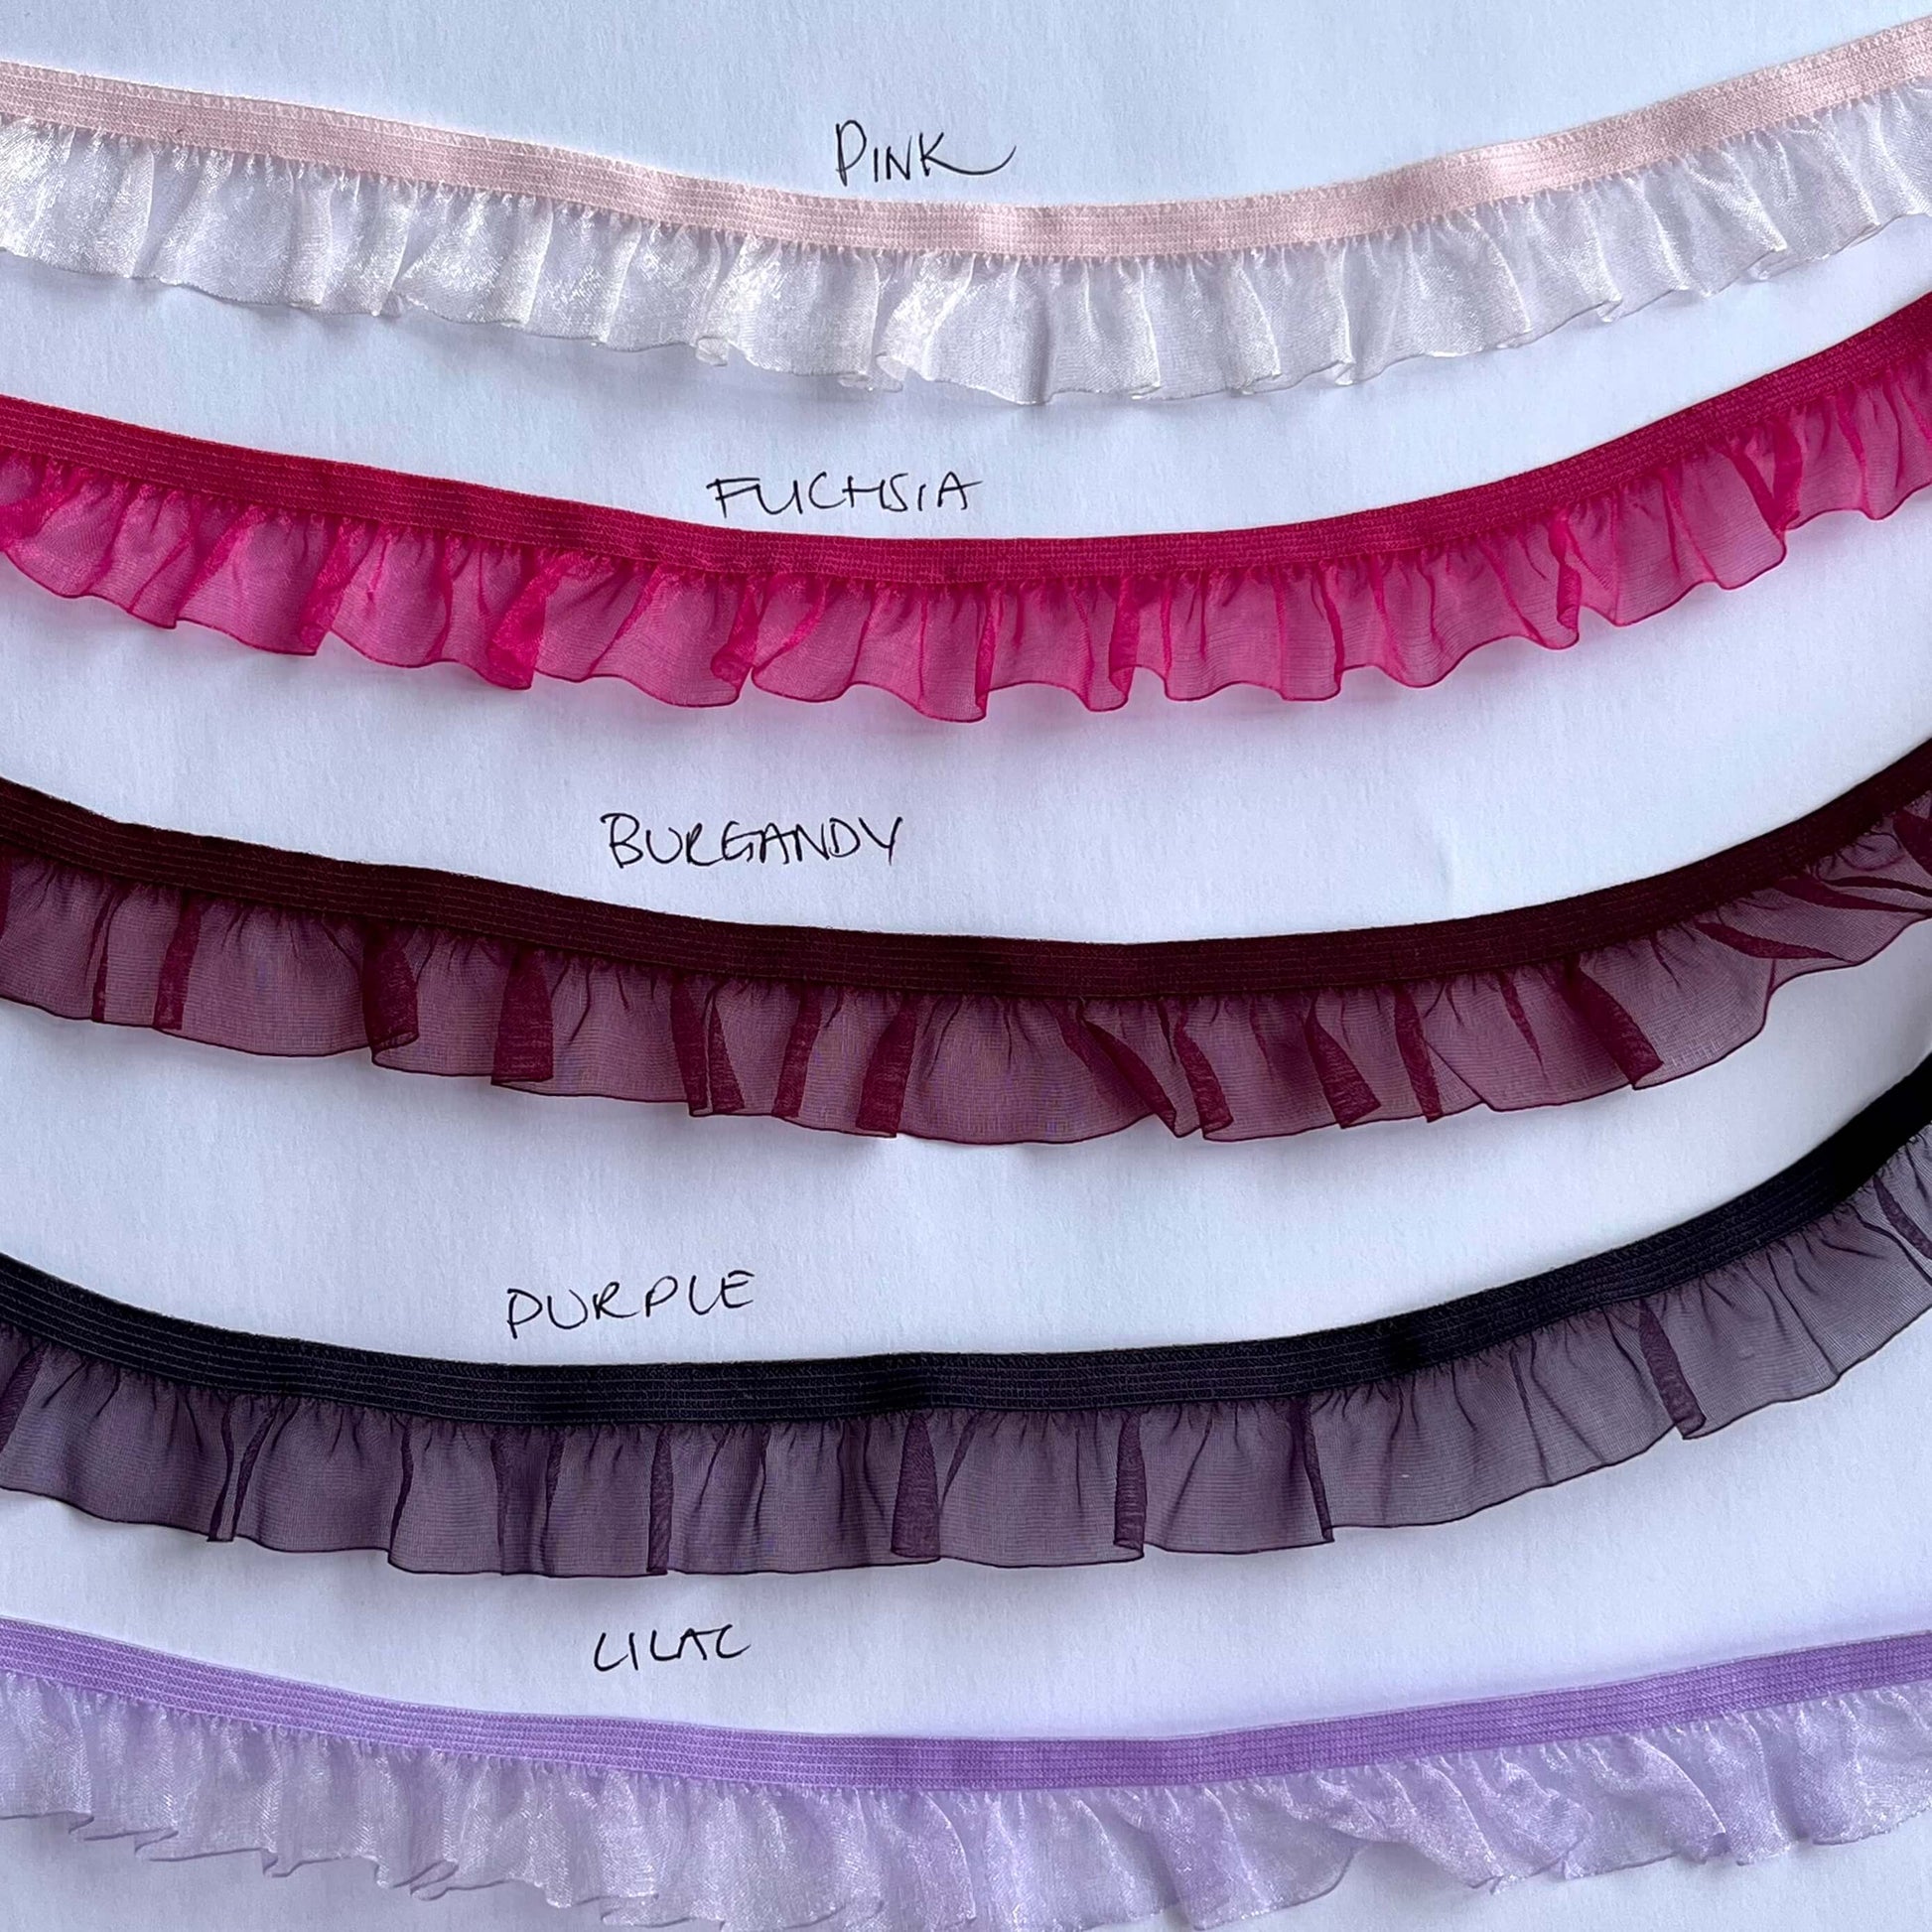 19mm Soft Delicate Sheer Stretch Chiffon Edging Trim for lingerie and knickers